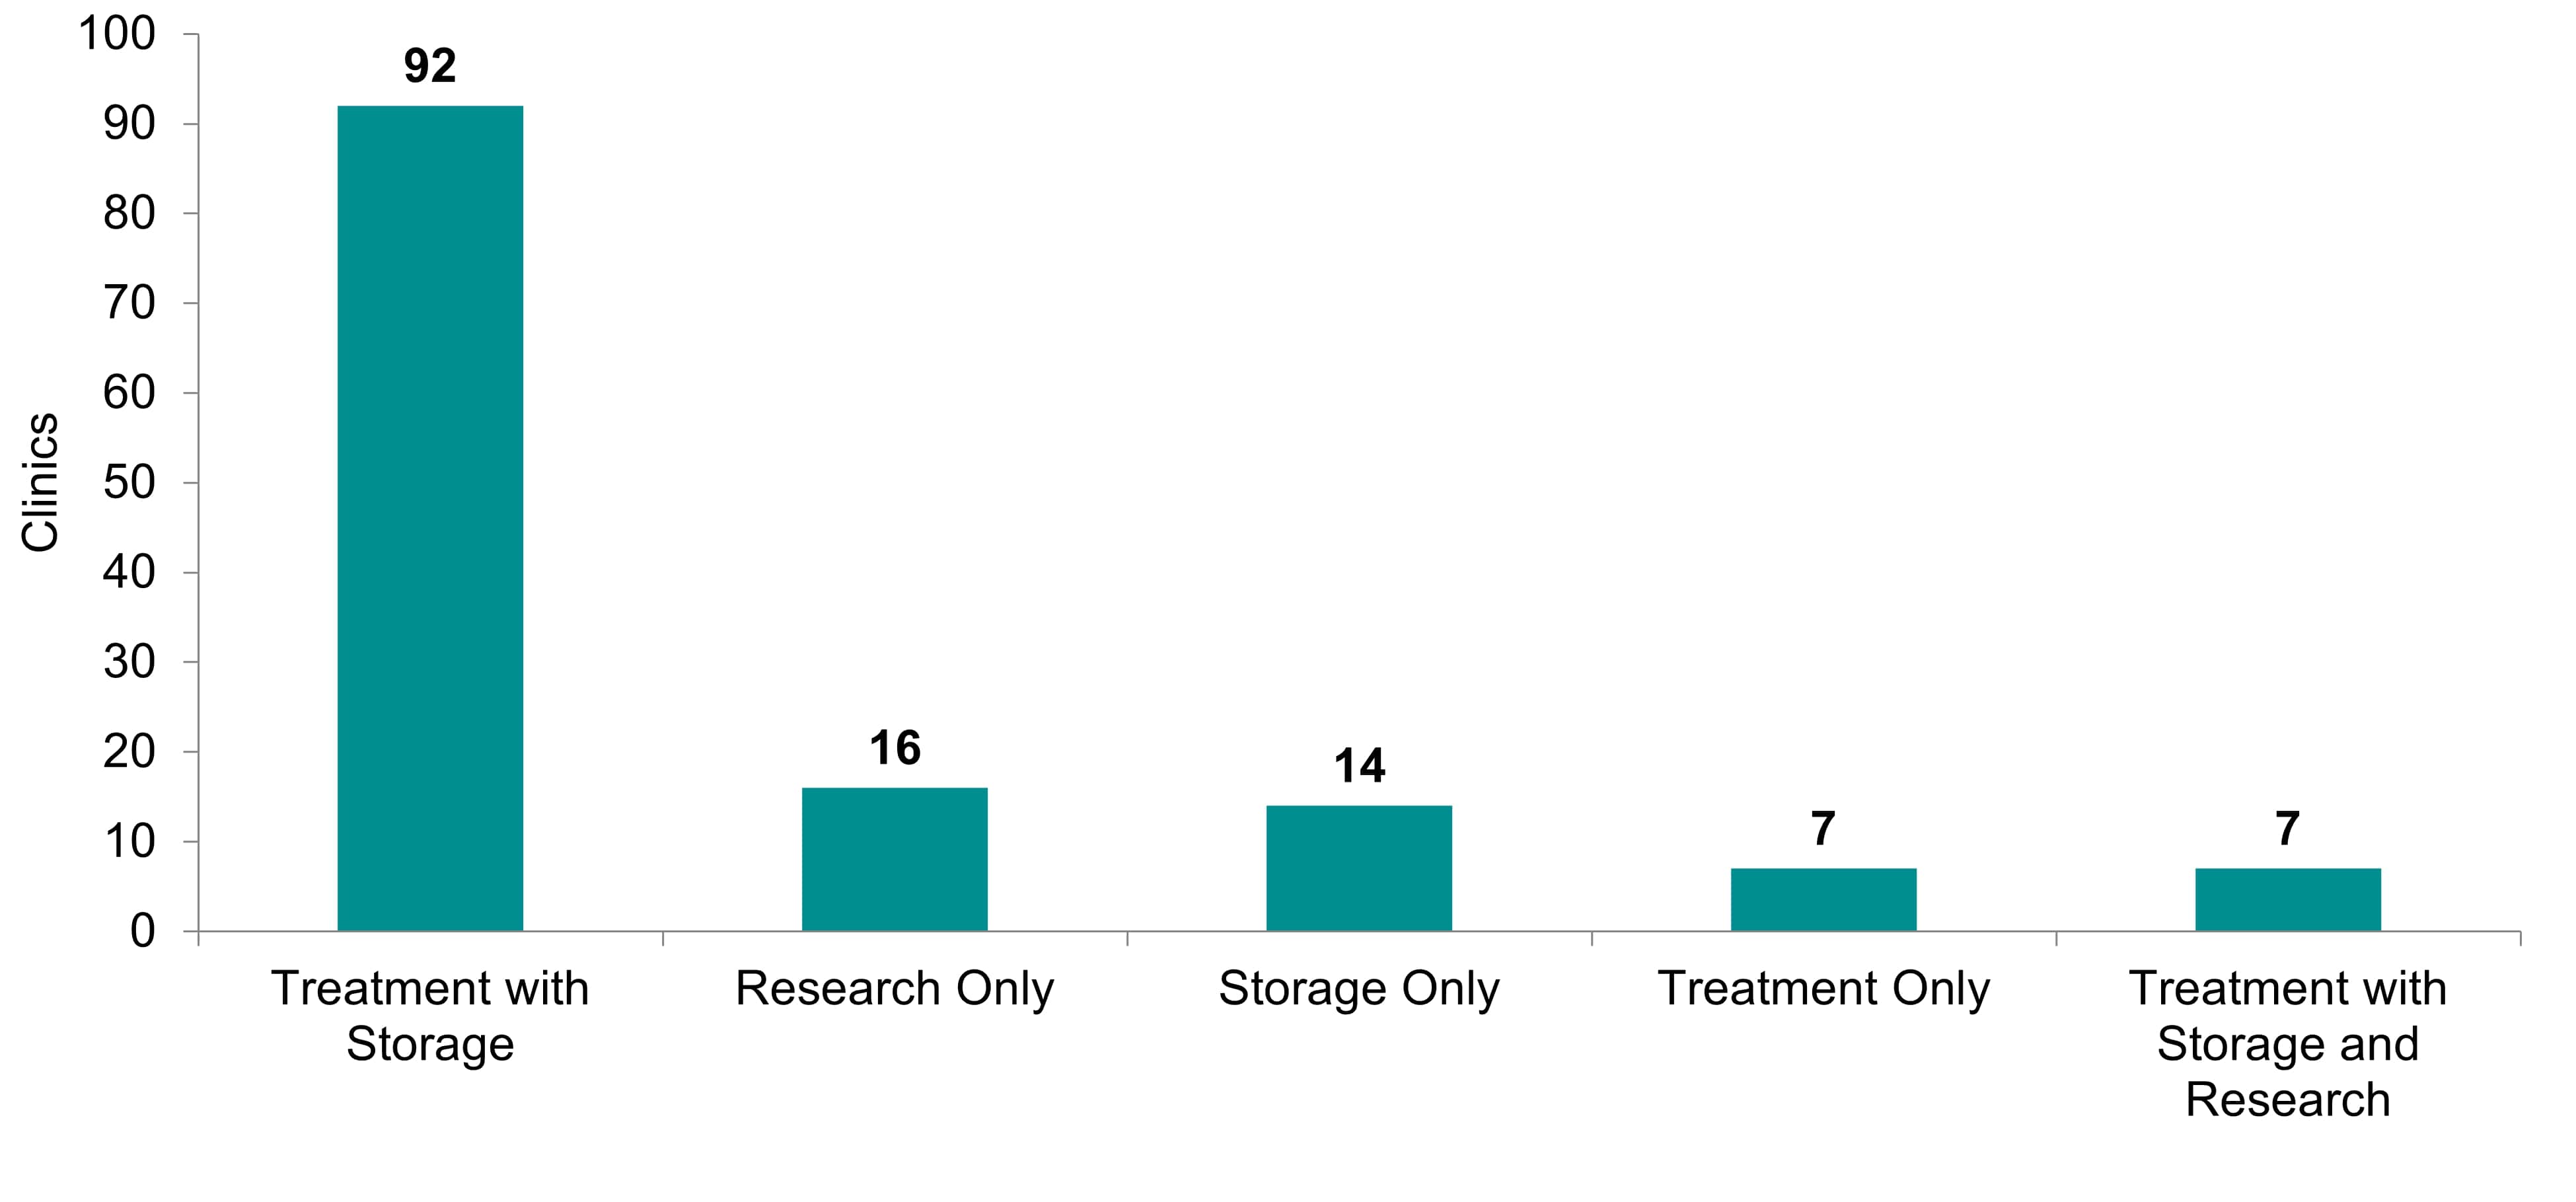 [1. Label] Number of clinics by type, 2019/20. [2. Construction] This bar chart shows the number of clinics for treatment with storage, research only, storage only, treatment only and treatment with storage and research. [3. Summary] There were 106 licensed fertility clinics in the UK in 2019/20. Treatment with storage had the highest number of clinics followed by research only [4. Data] The figures are treatment with storage 92, research only 16, storage only 14, treatment only 7, and treatment with storage and research 7.